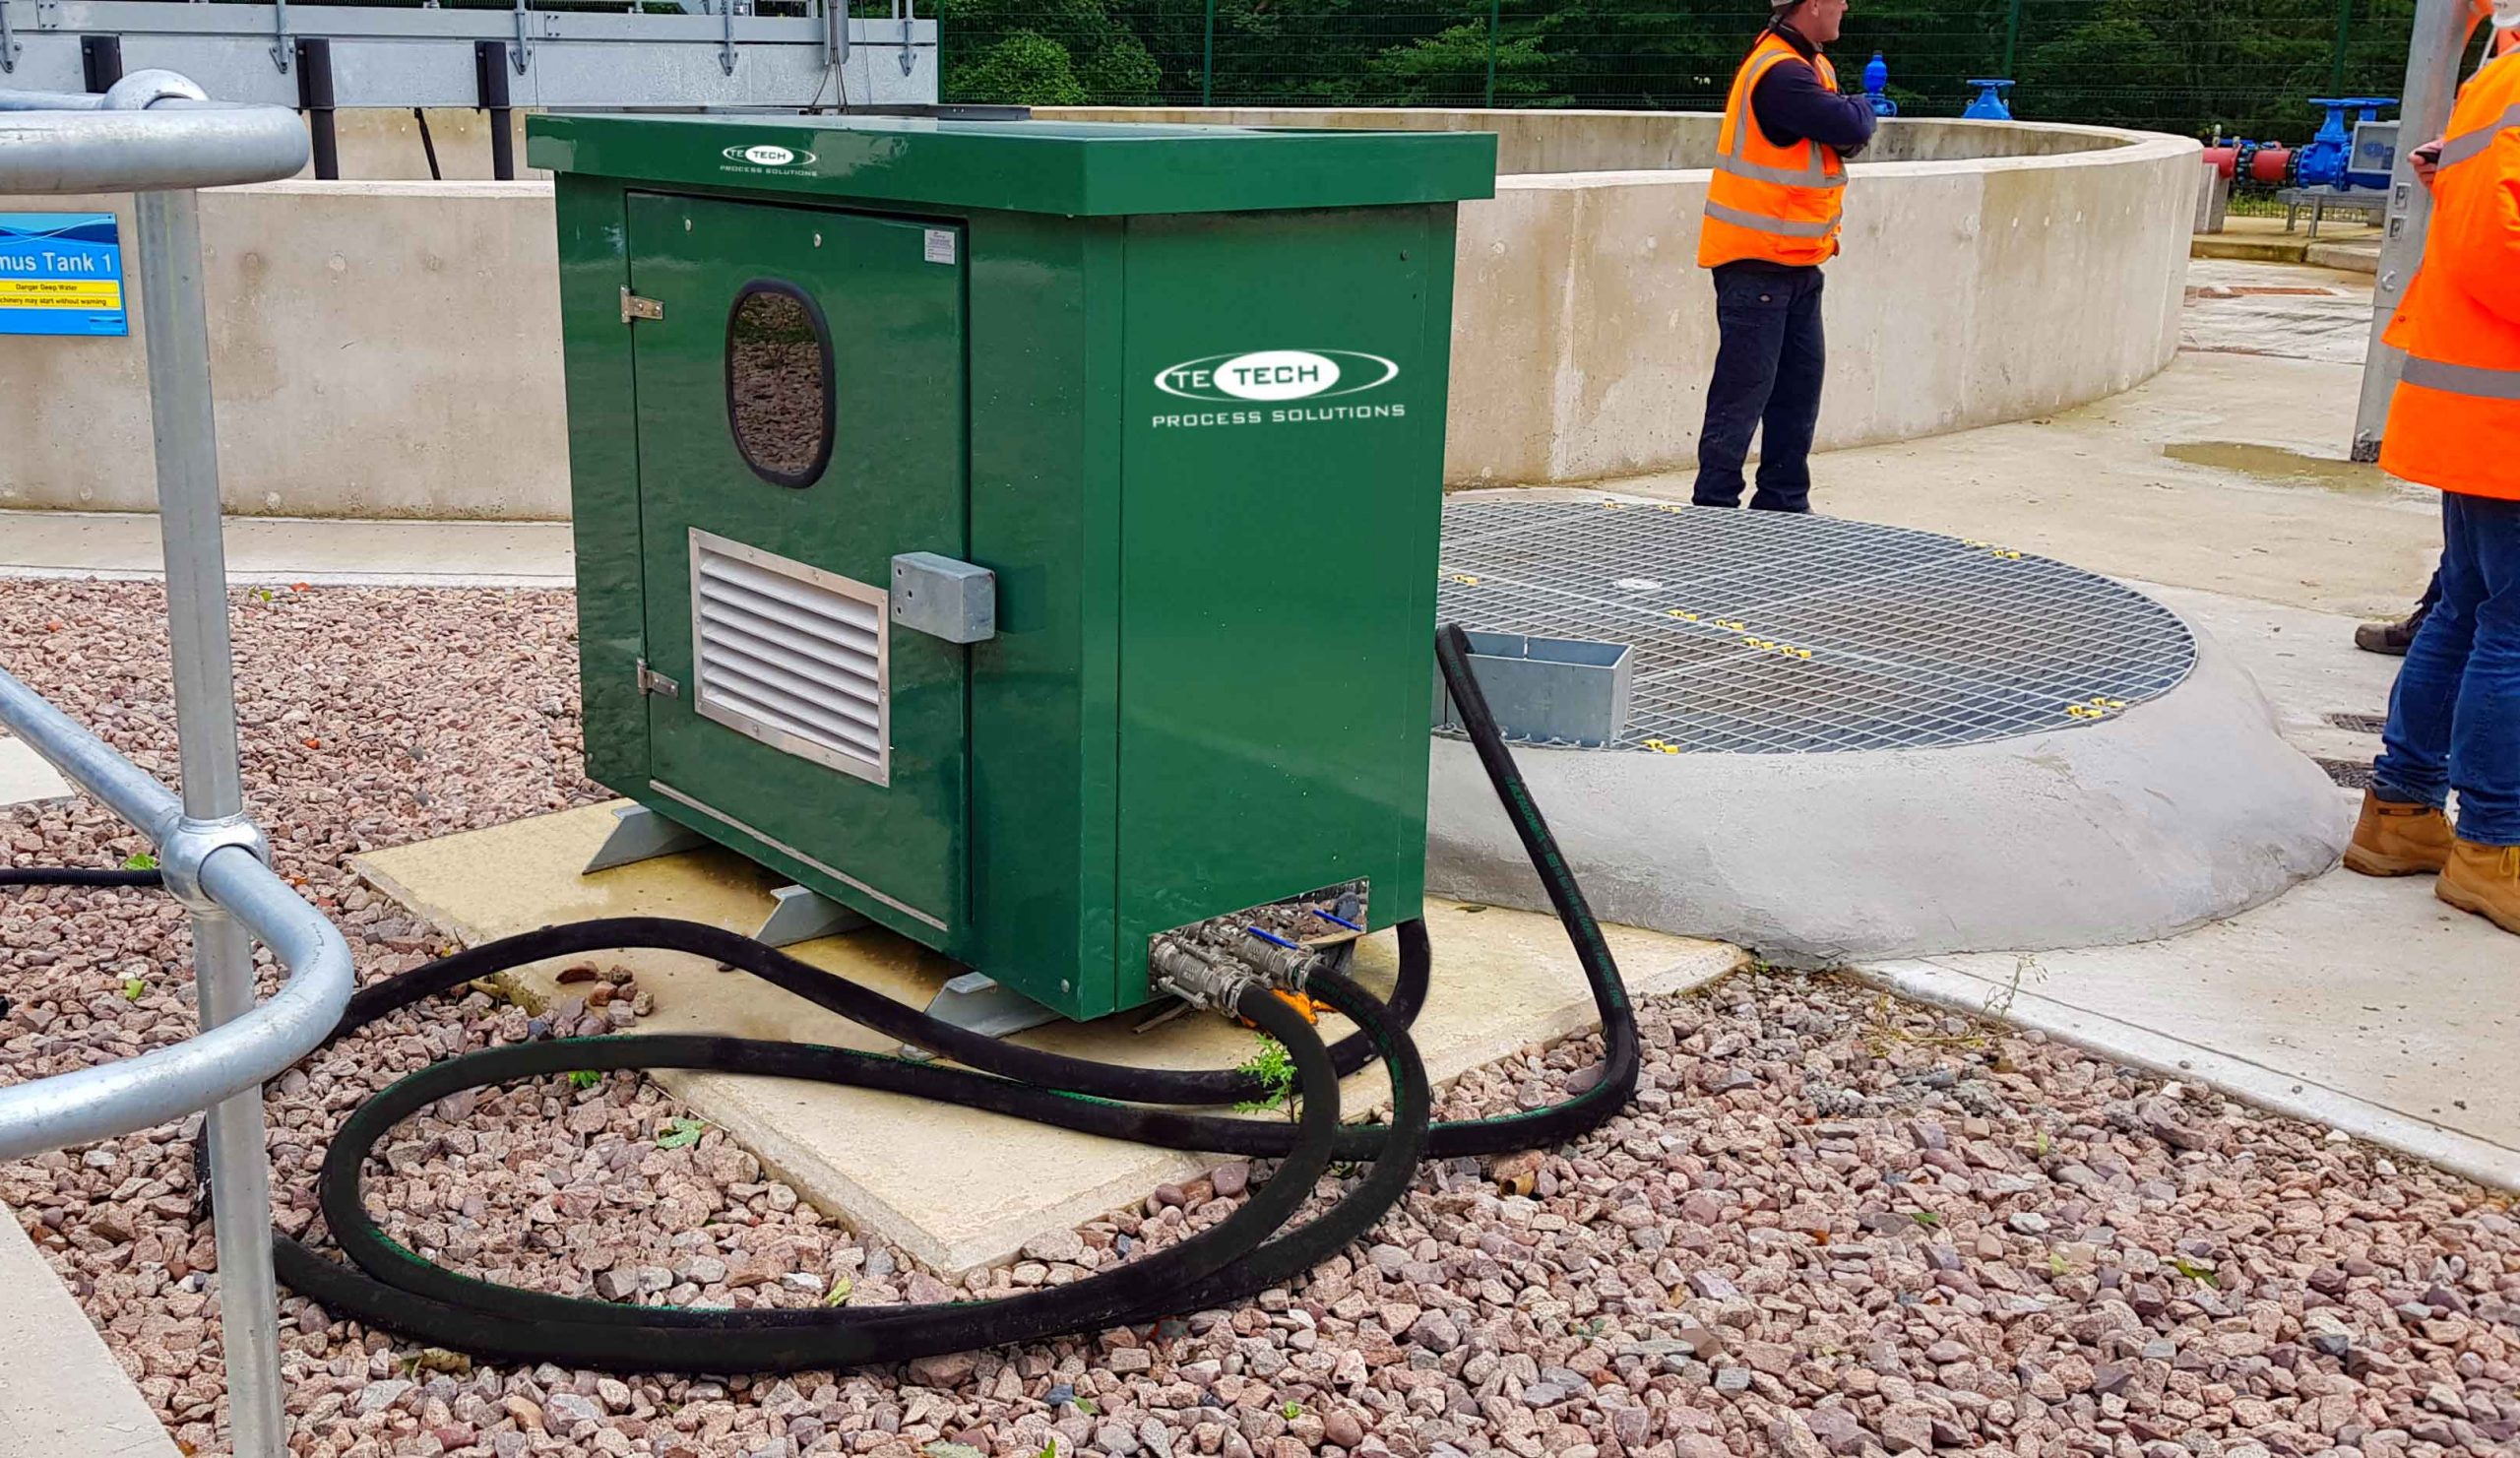 Yorkshire Water uses Te-Tech air-lift pumping for wastewater duties